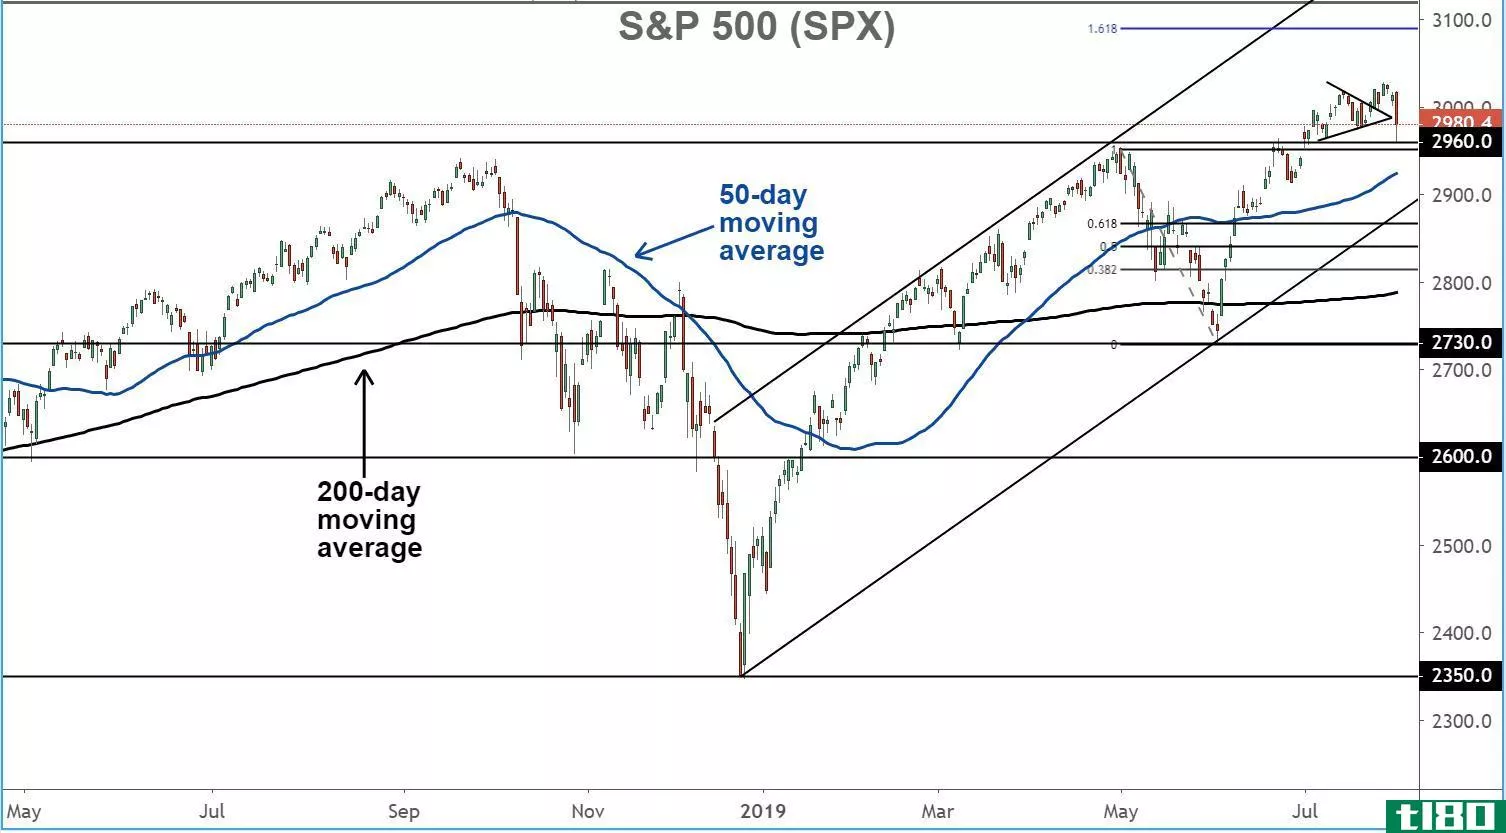 Chart showing the performance of the S&P 500 Index